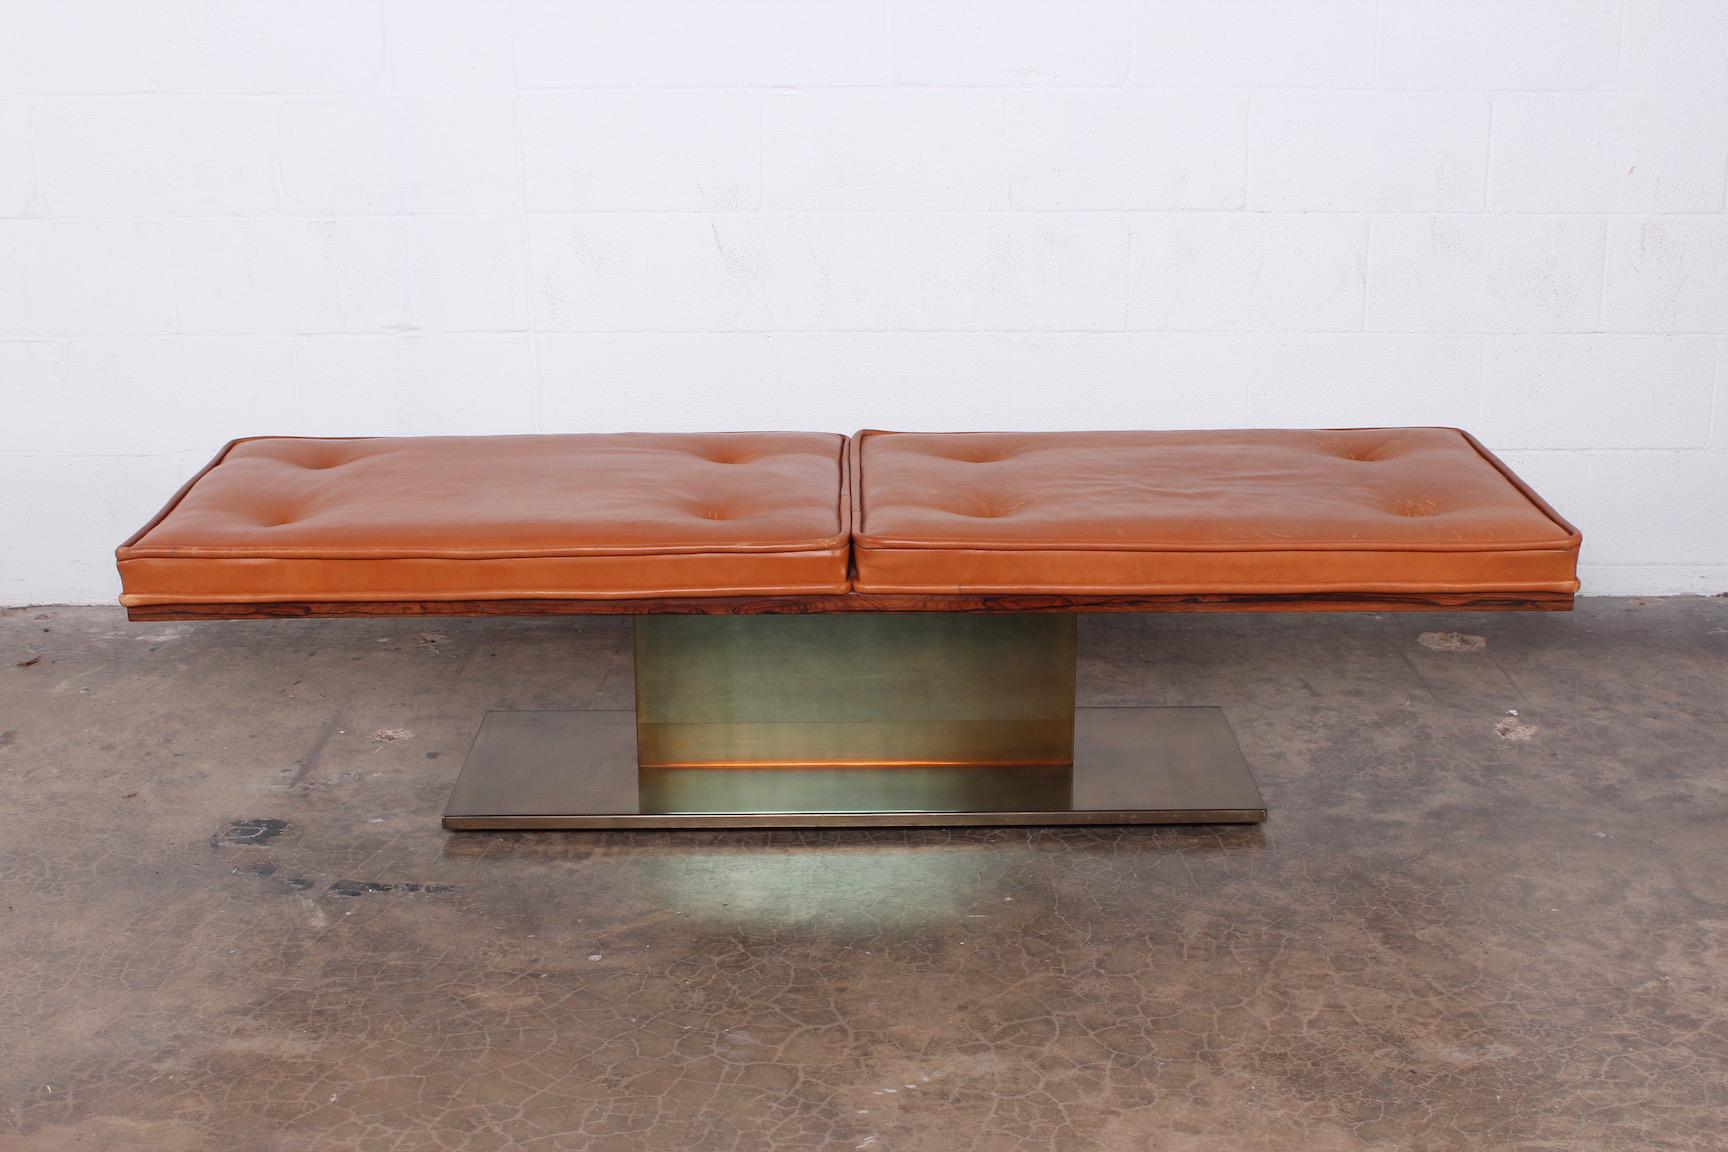 A rare bronze and leather bench designed by Warren Platner for Lehigh Leopold. Pair available.